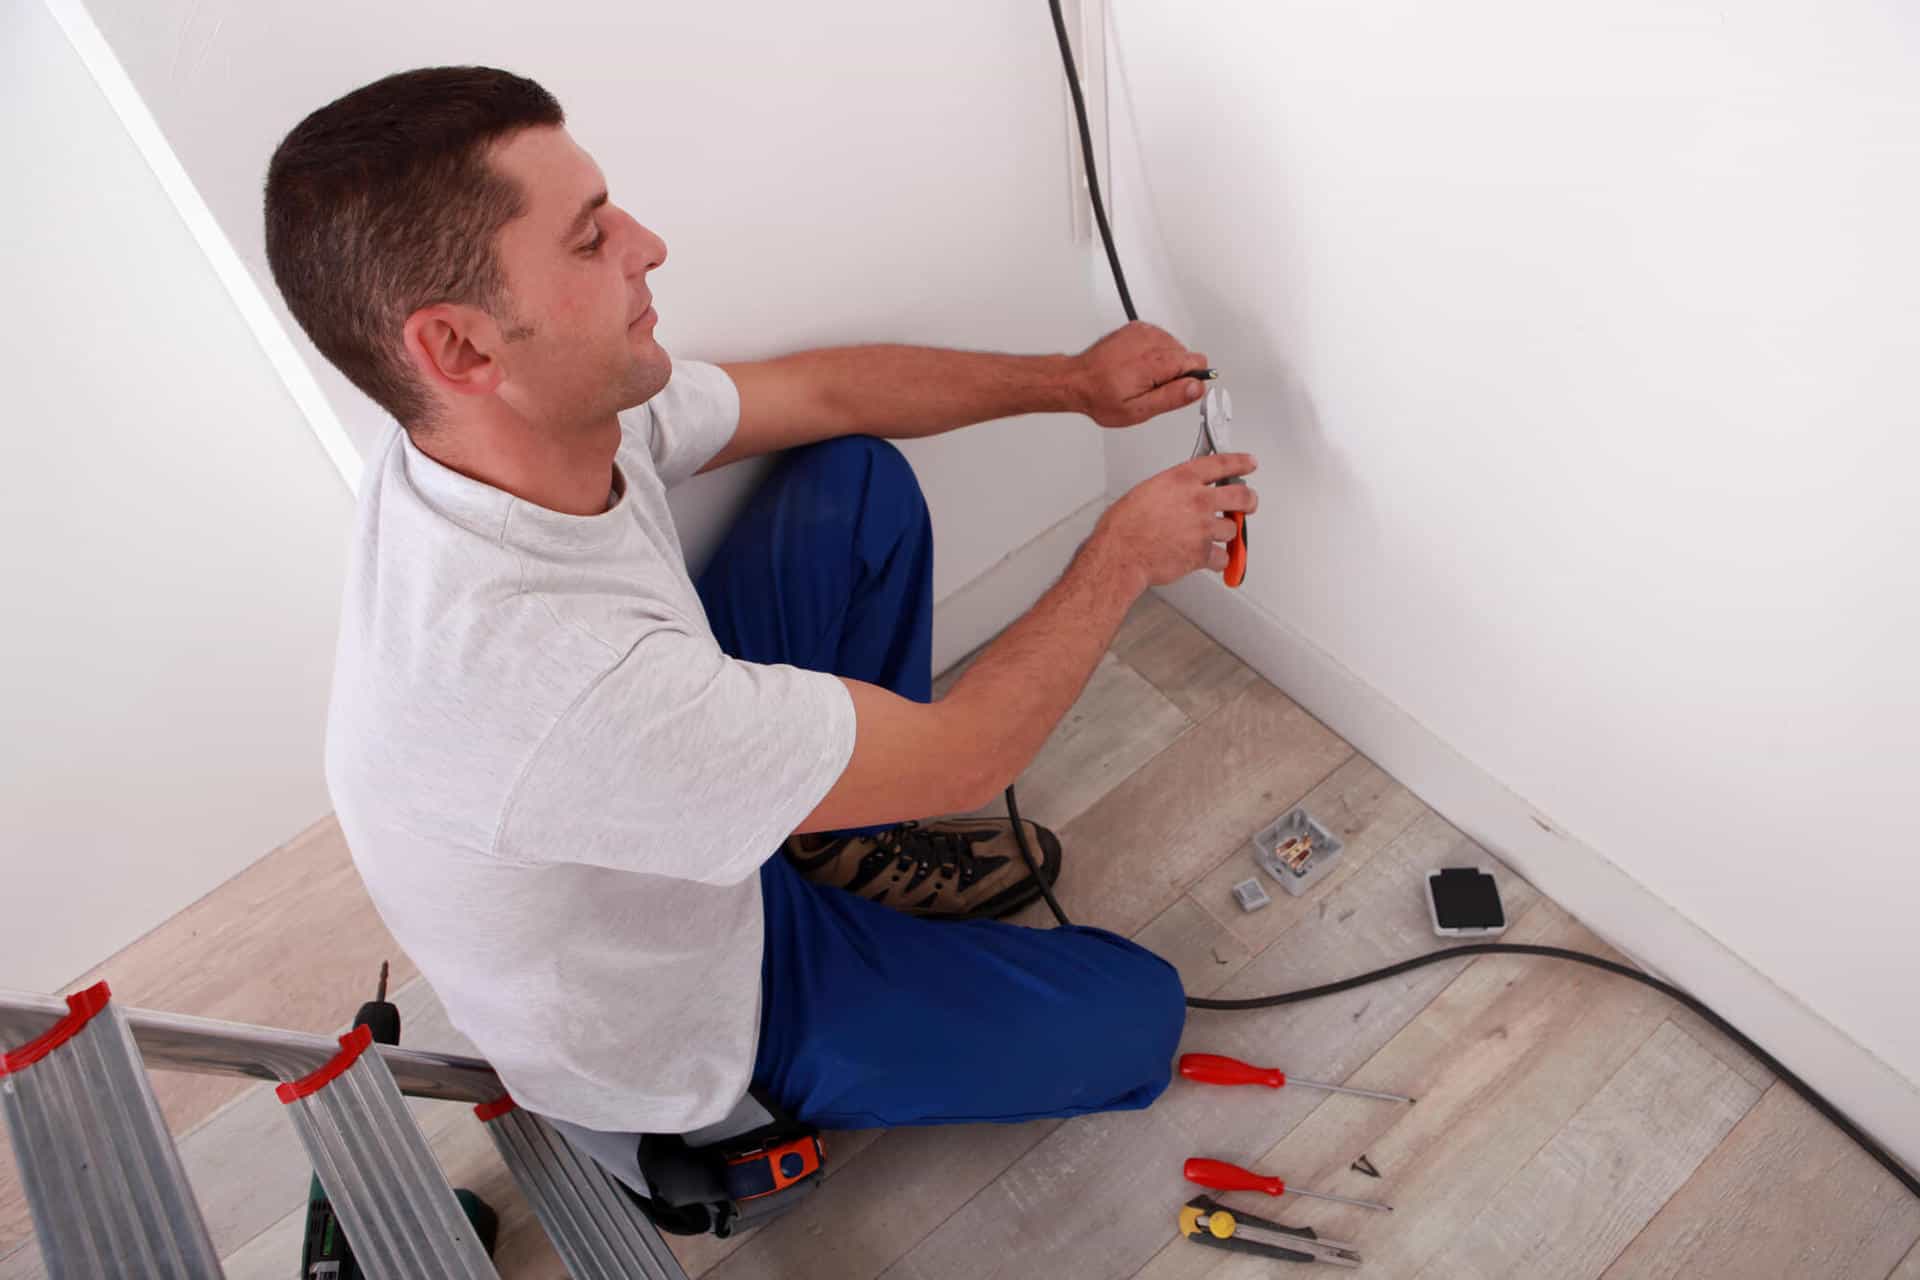 Qualified Electricians Near Me - Emergency 24-hr Electrician Available